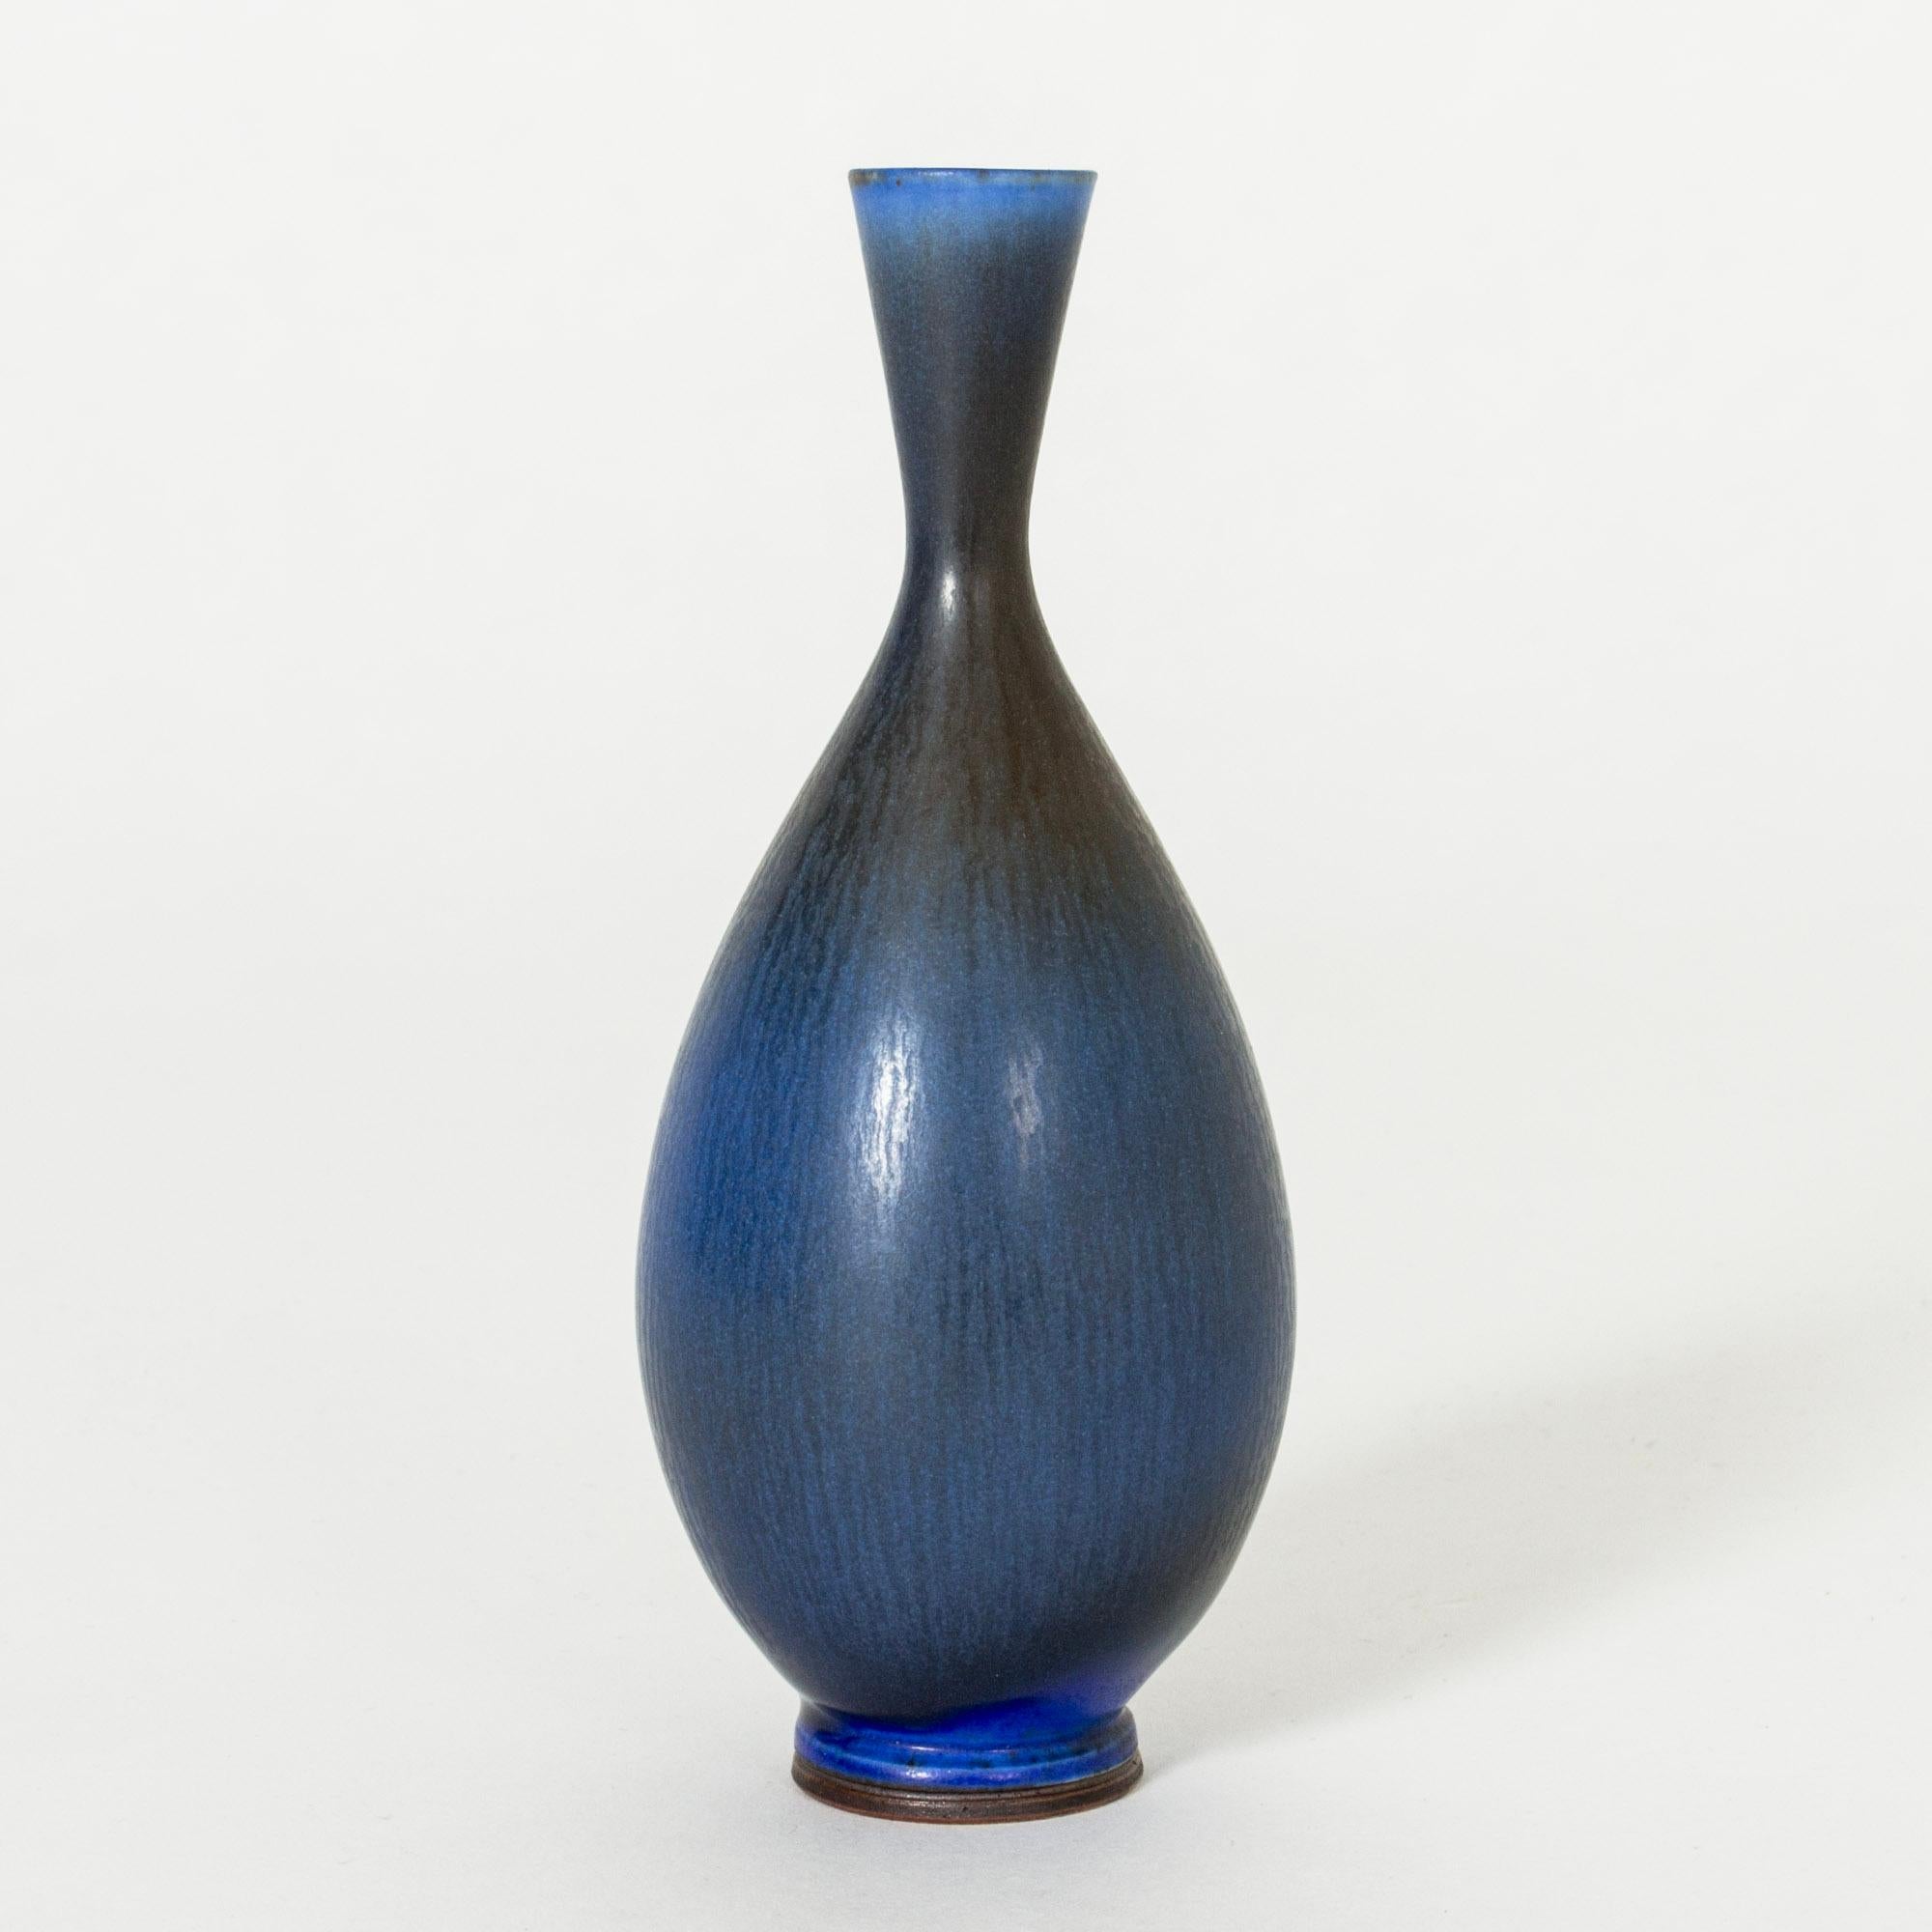 Beautiful, small stoneware vase by Berndt Friberg, in a curvesome form with blue hare’s fur glaze, blending into darker blue.

Berndt Friberg was a Swedish ceramicist, renowned for his stoneware vases and vessels for Gustavsberg. His pure, composed